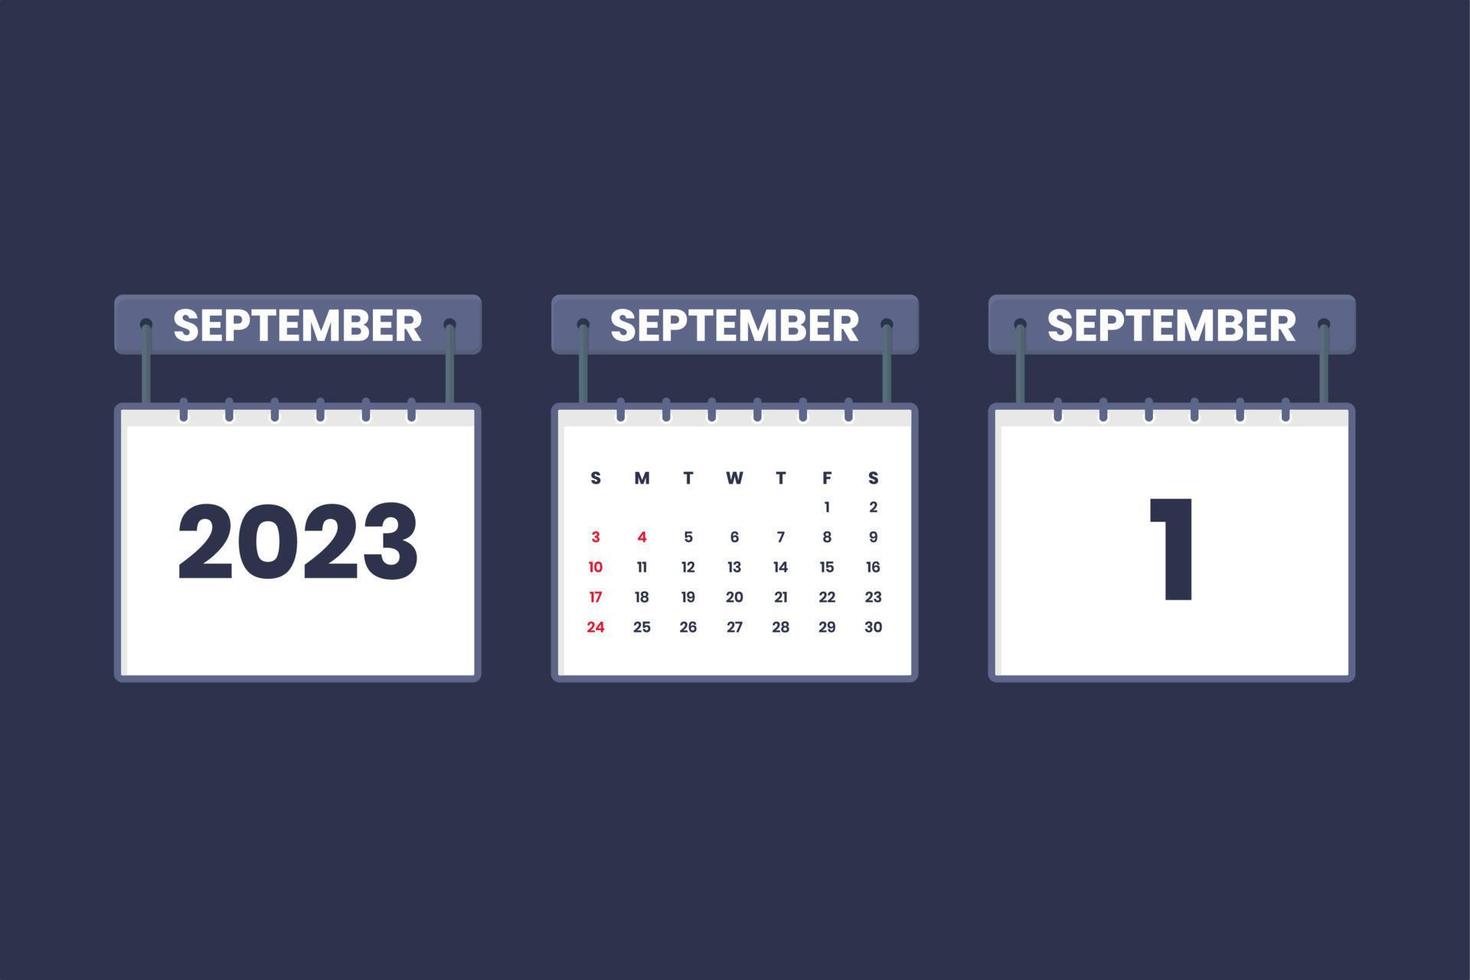 1 September 2023 calendar icon for schedule, appointment, important date concept vector